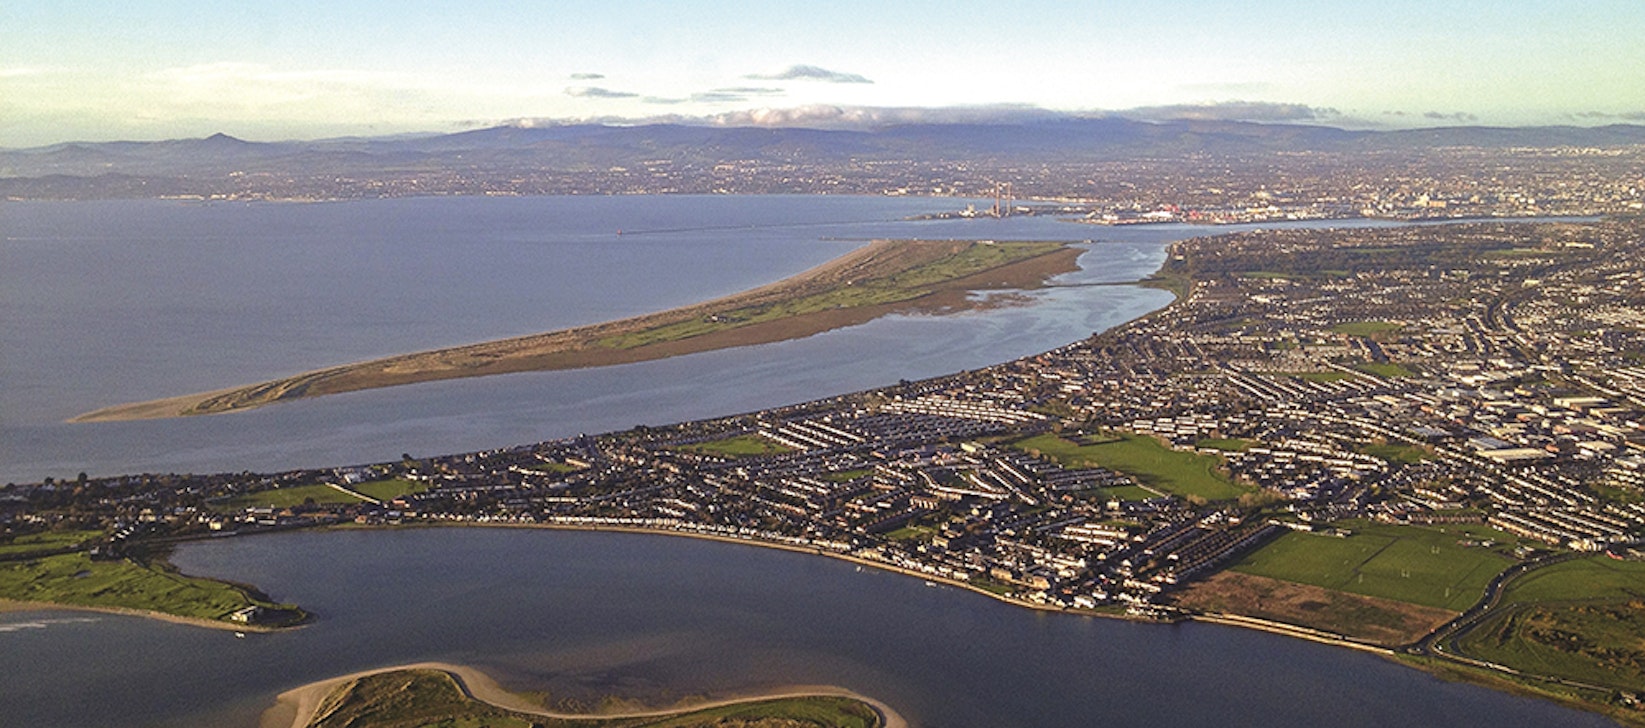 Dublin Bay biosphere turns UNESCO designation into an opportunity for sustainable business